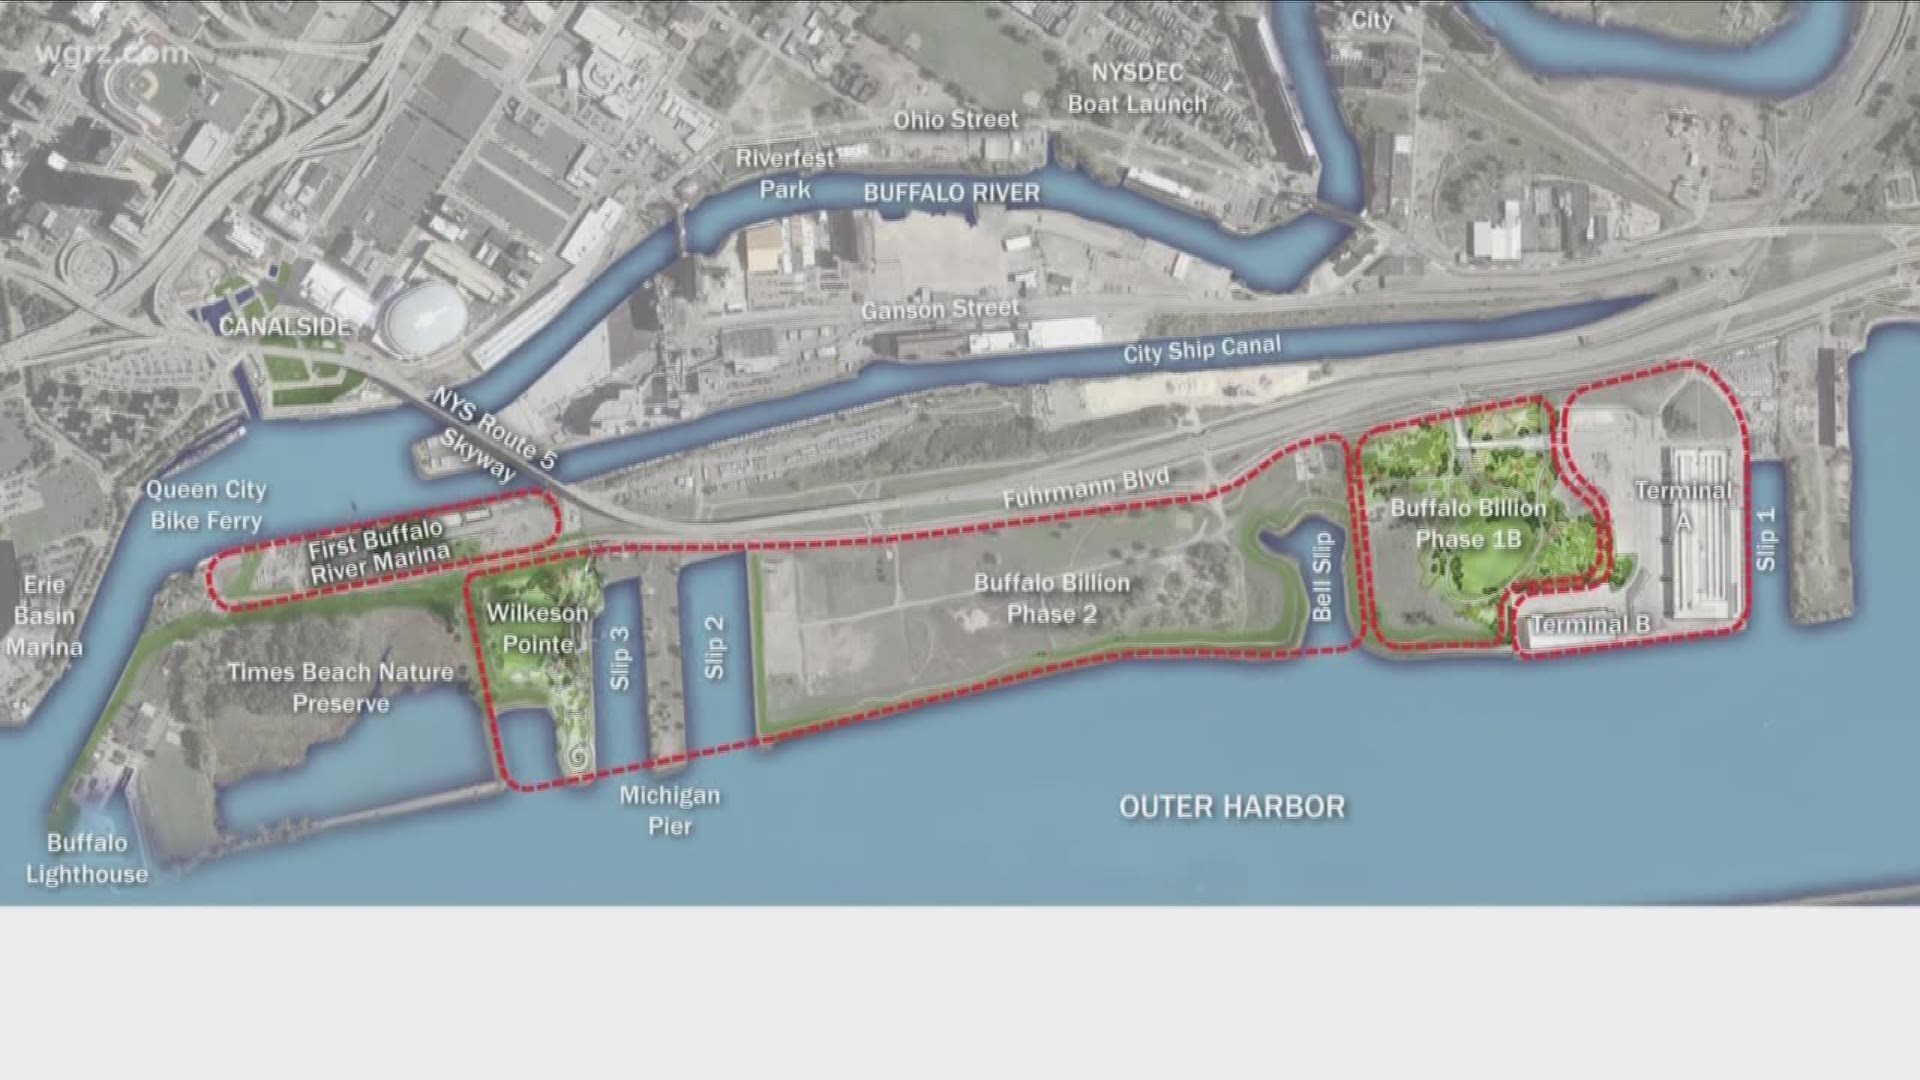 ECHDC Approves 4 Projects For Outer Harbor